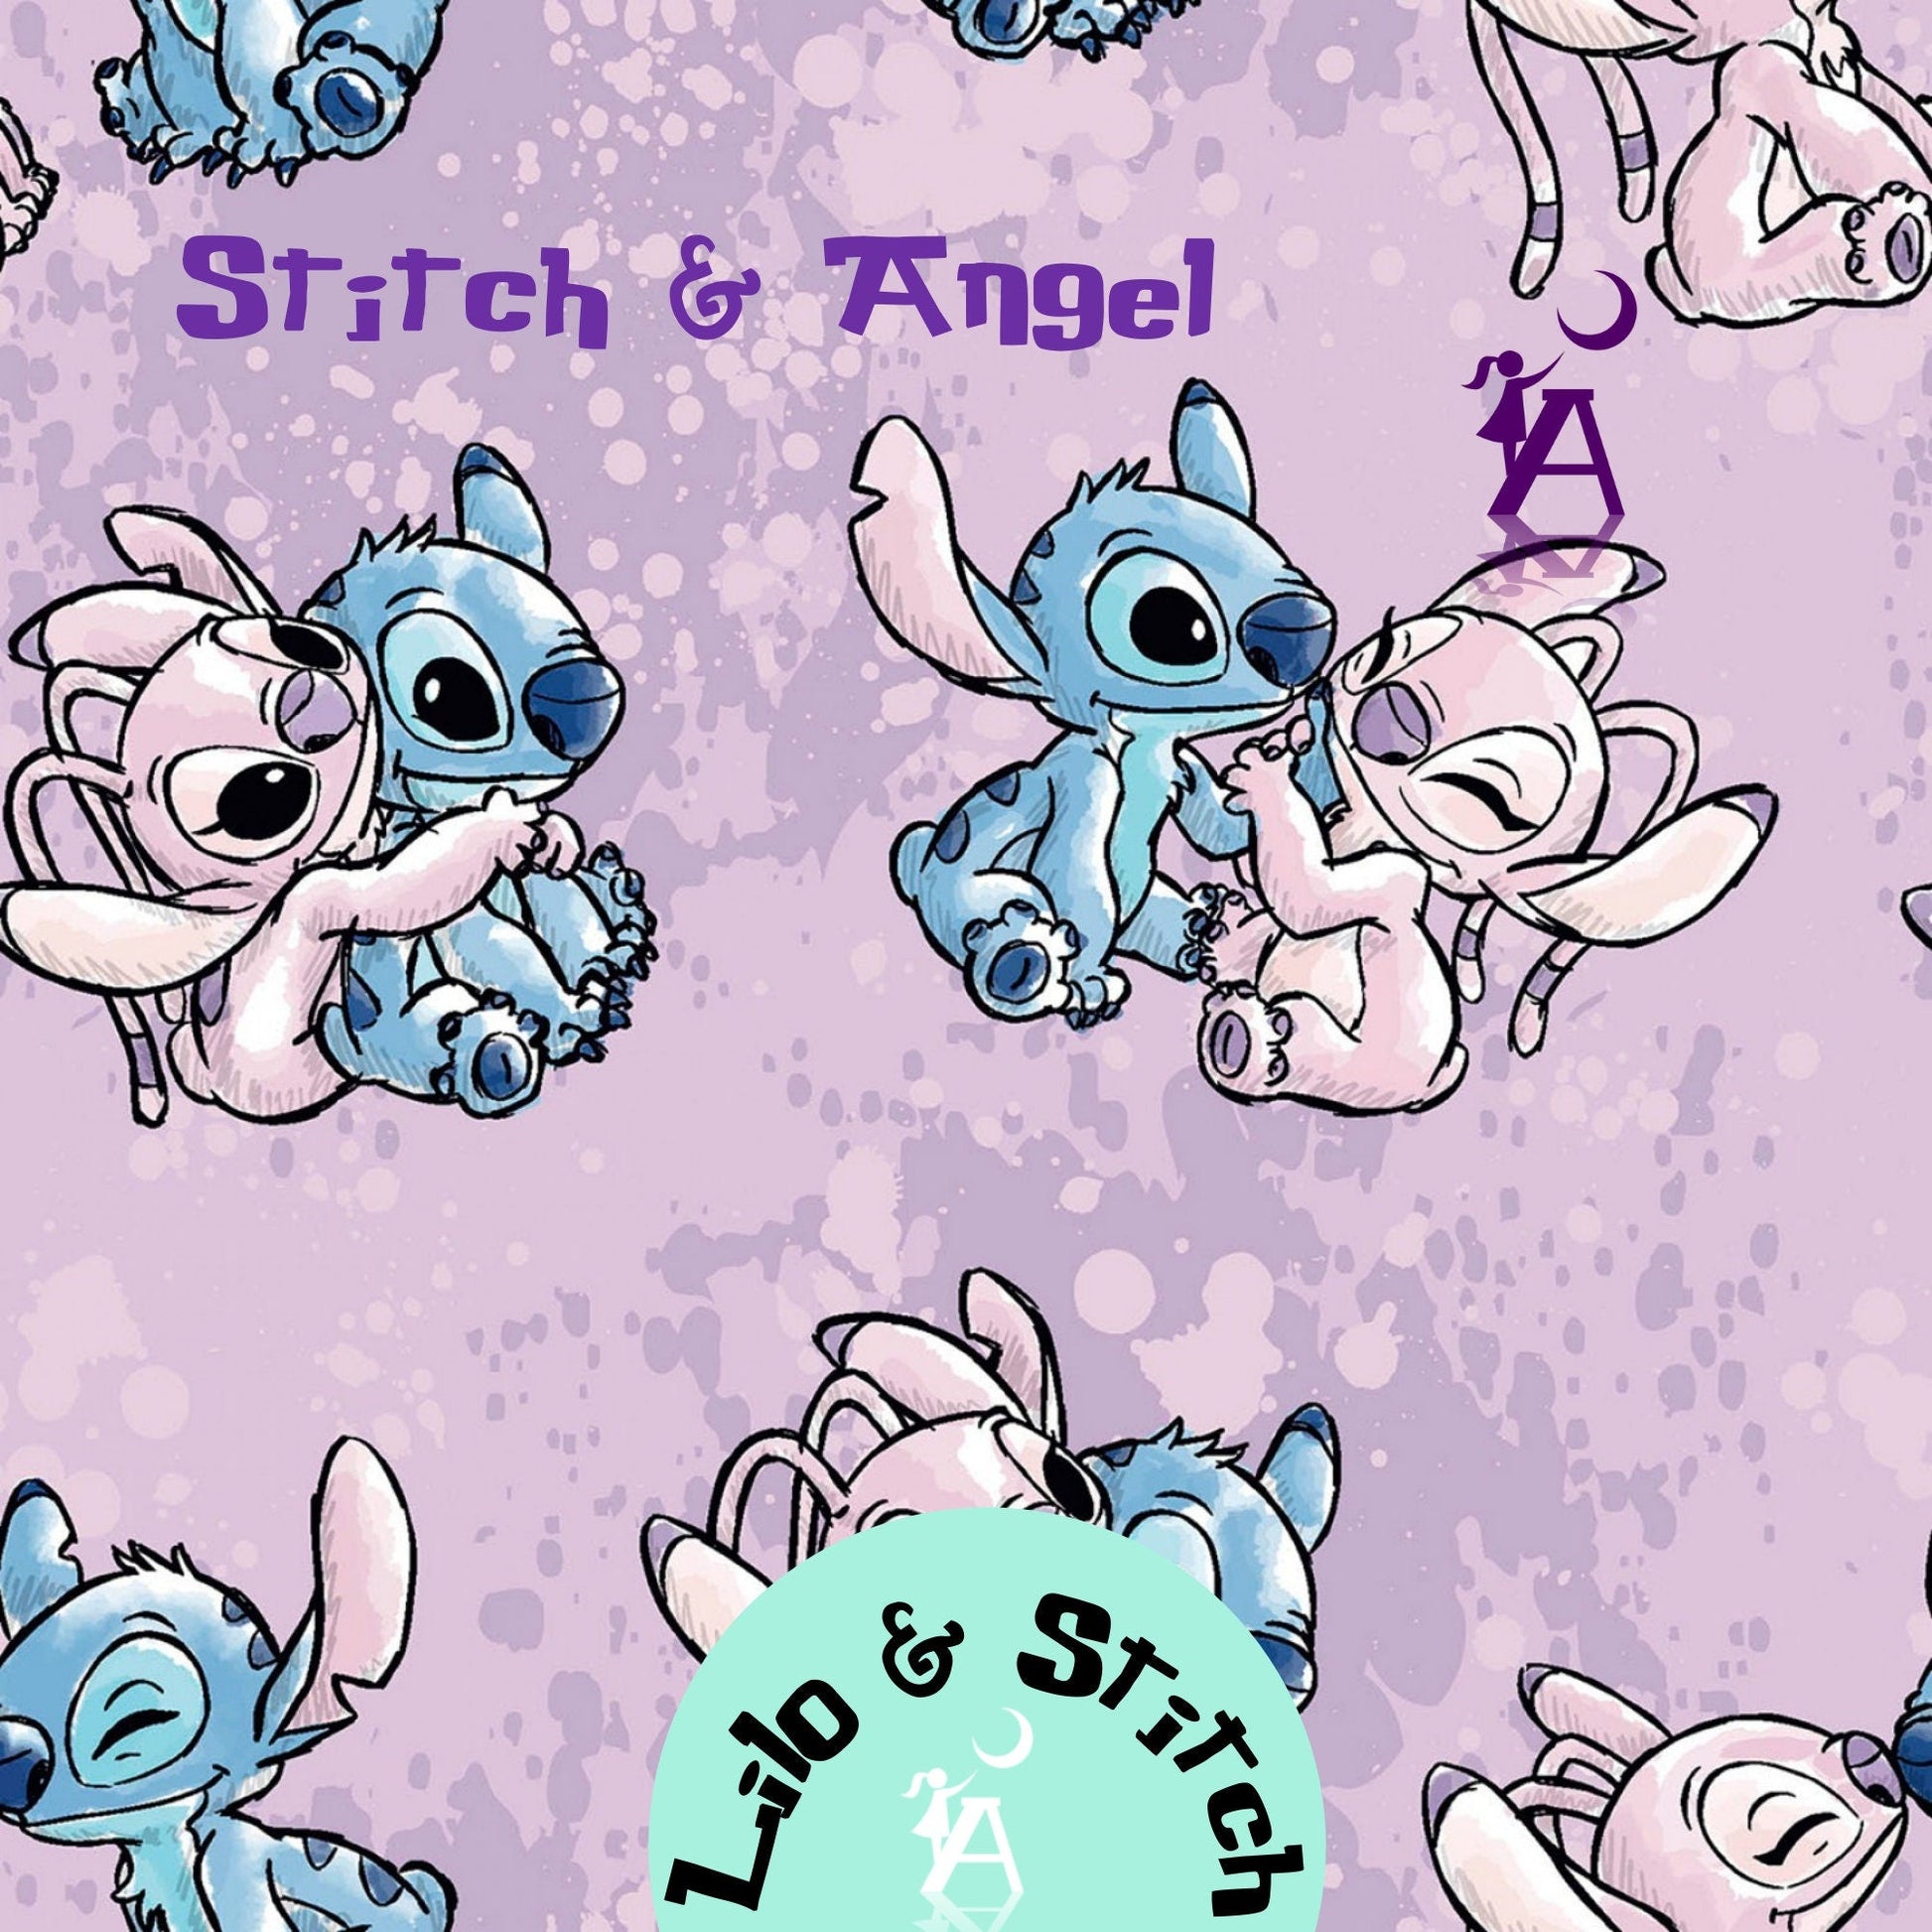 Springs Creative Fabric Springs Creative Lilo and Stitch Bundle with Lilo and Stitch Panel, Lilo & Angel fabric, Disney Licensed Fabric